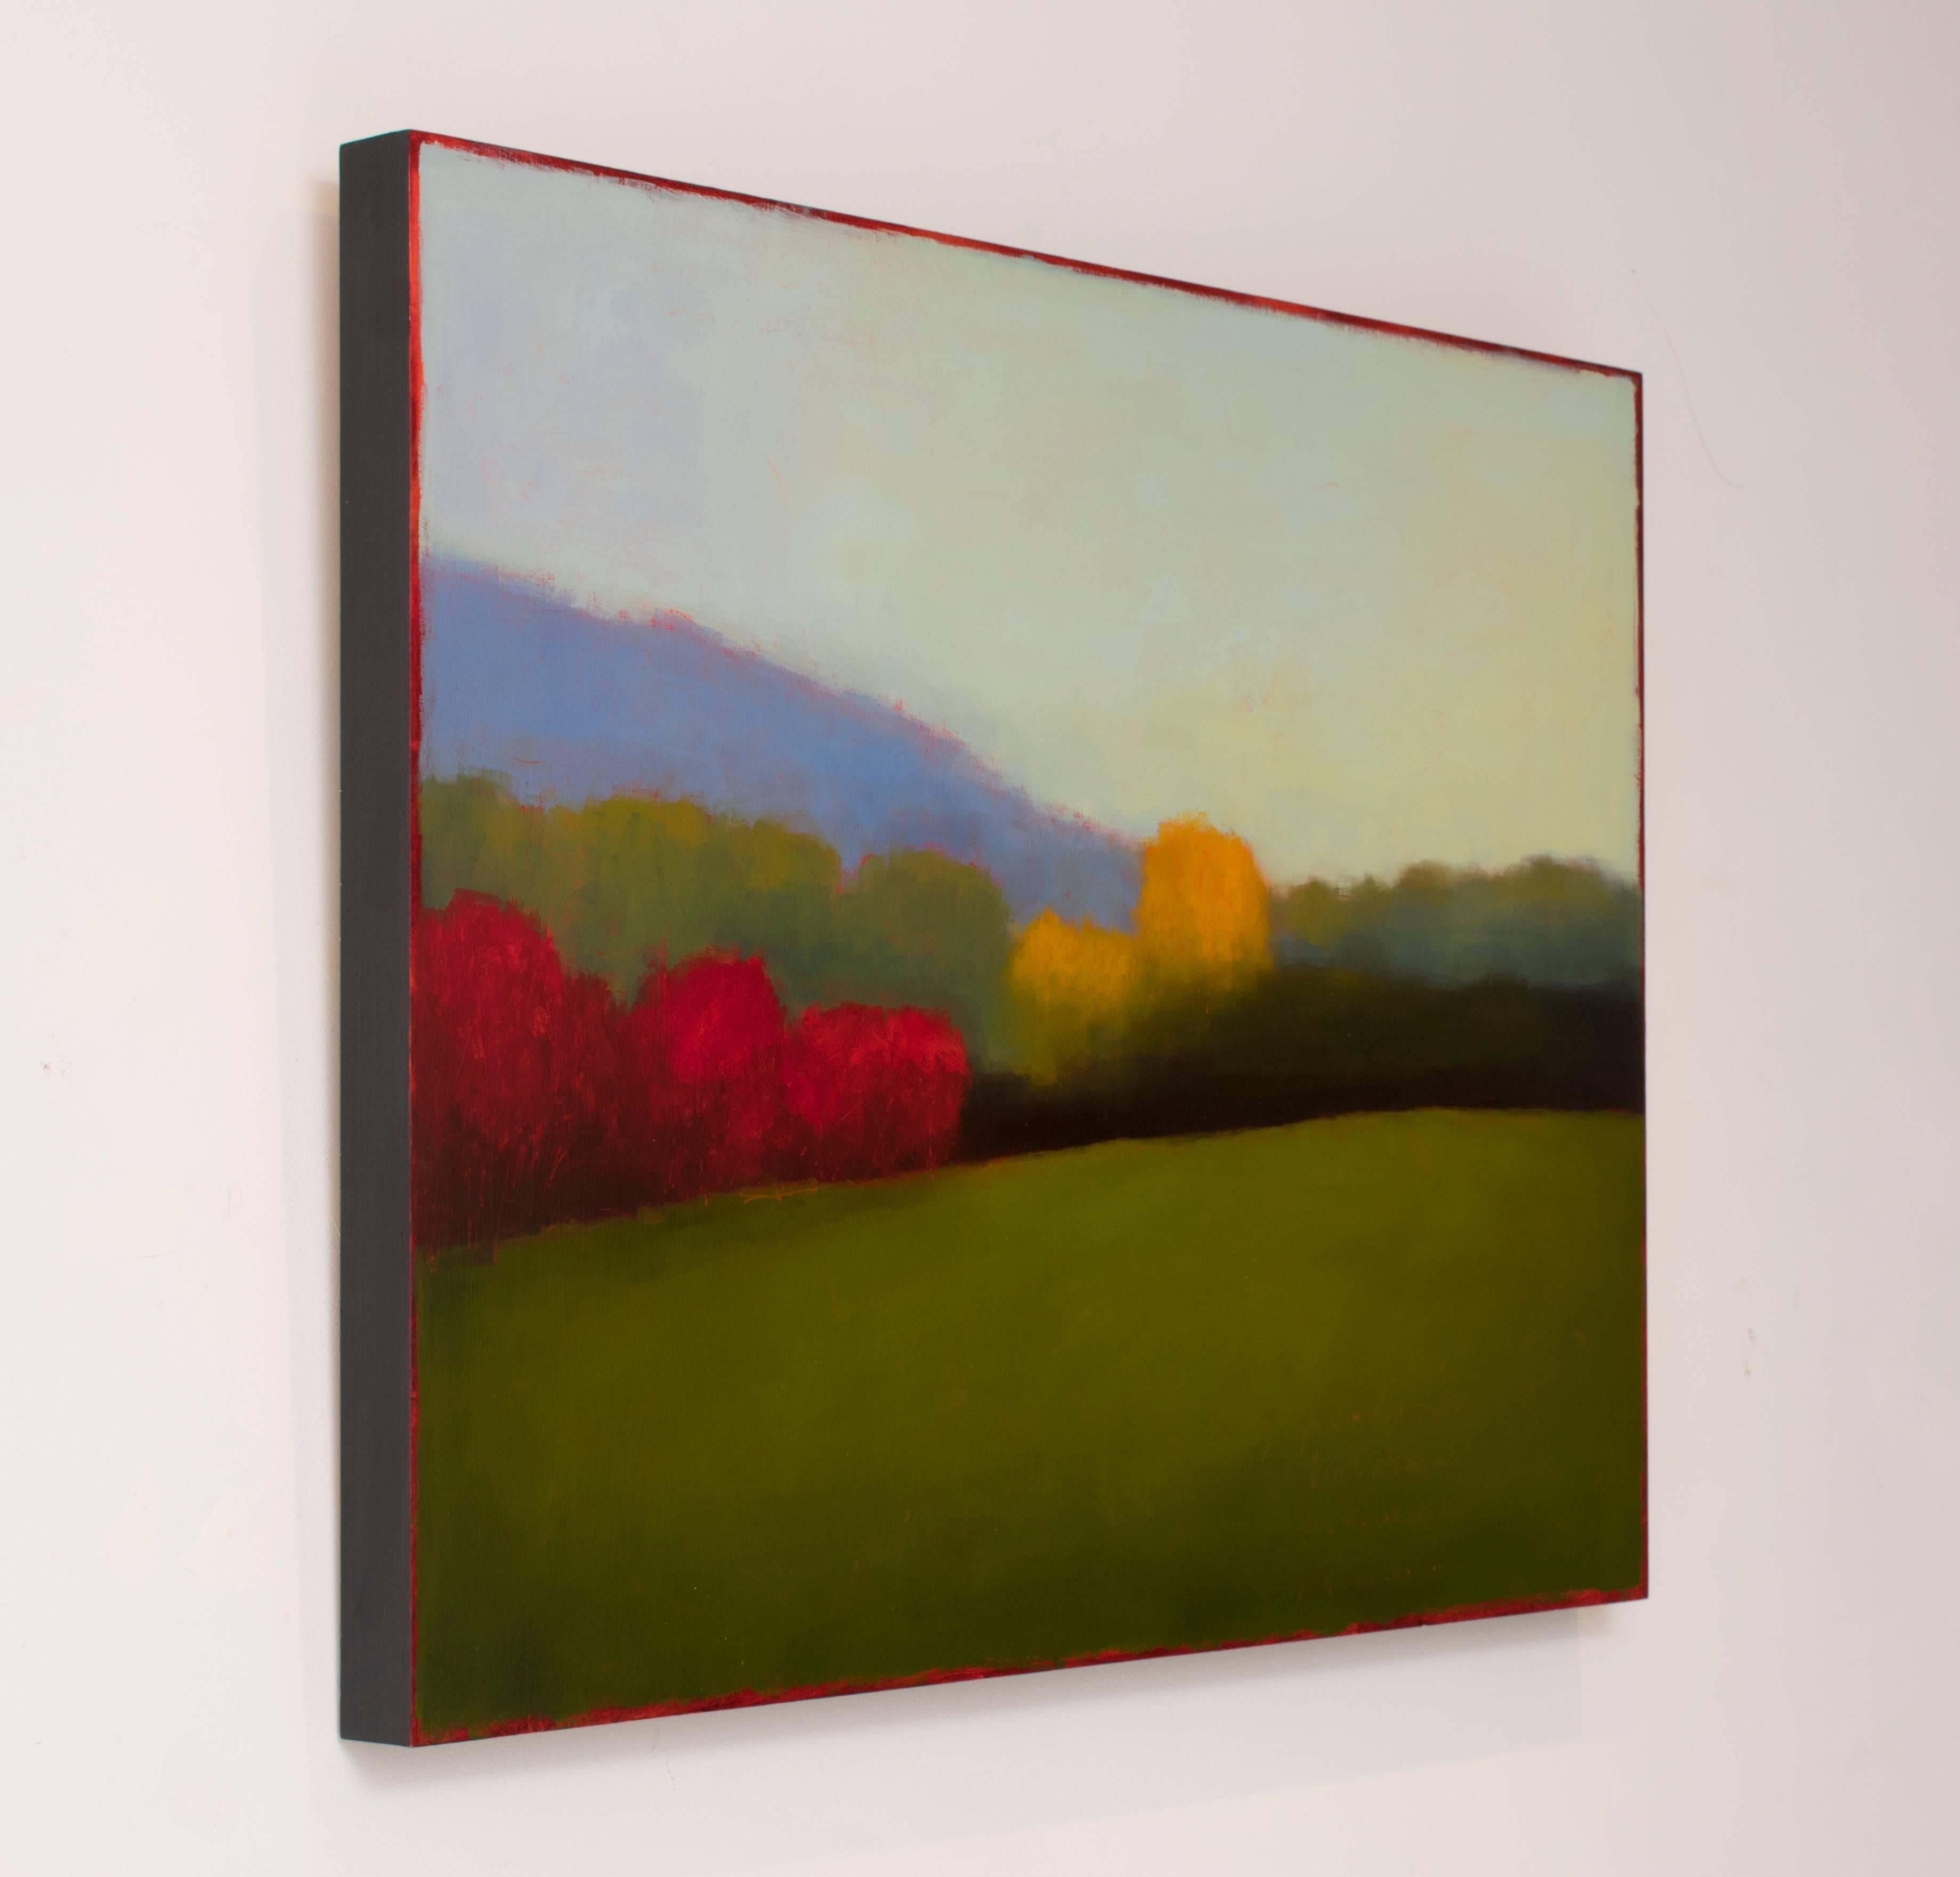 Abstract minimalist landscape painting on panel in shades of red, yellow, blue and green 
oil on birch panel, 30 x 40 x 2 inches
Ready to hang as is, no frame required, Edges of panel are painted soft black

Helgeson saturates a panel with layers of